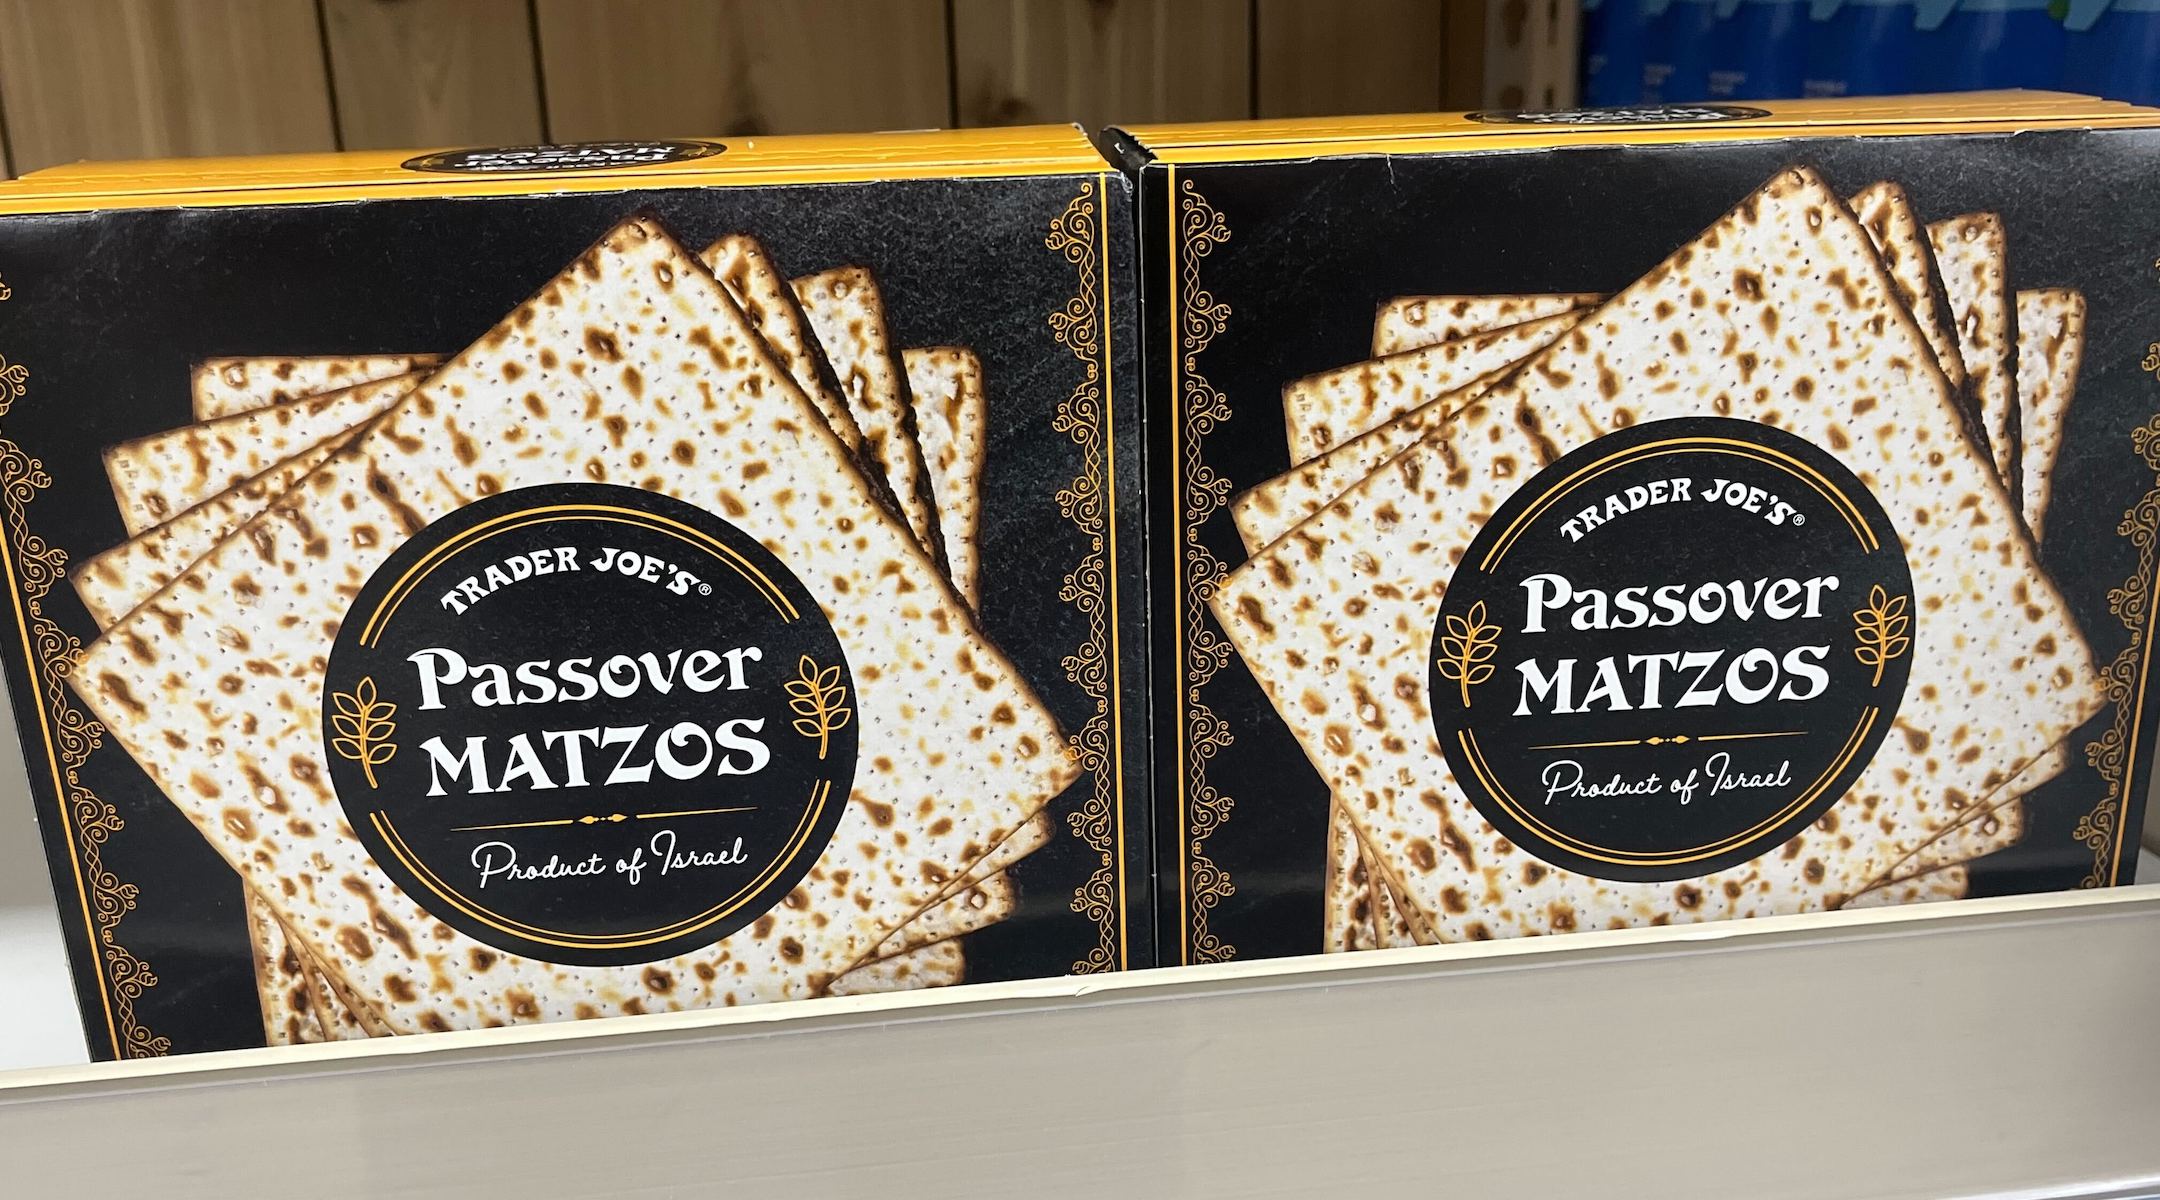 A fifth question this Passover: what makes Trader Joe’s matzah different from all other matzah?